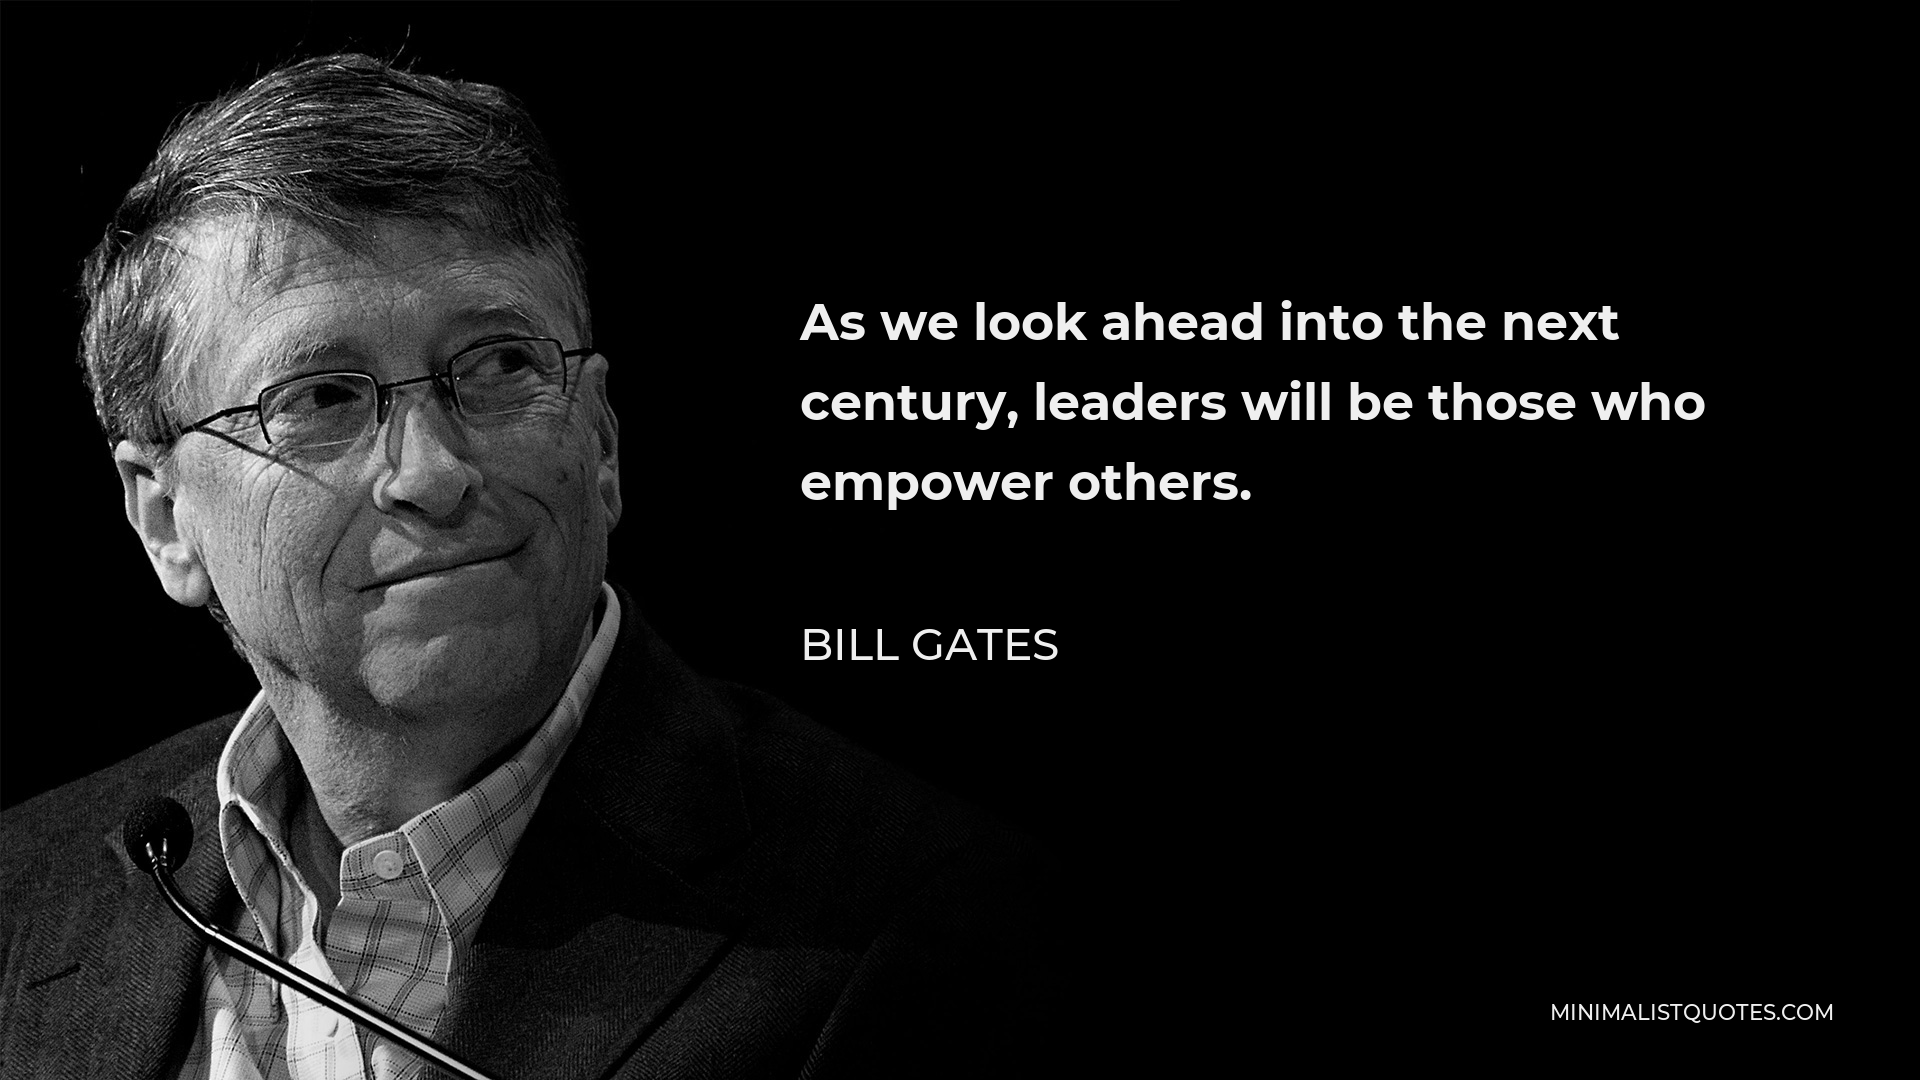 Bill Gates Quote - As we look ahead into the next century, leaders will be those who empower others.